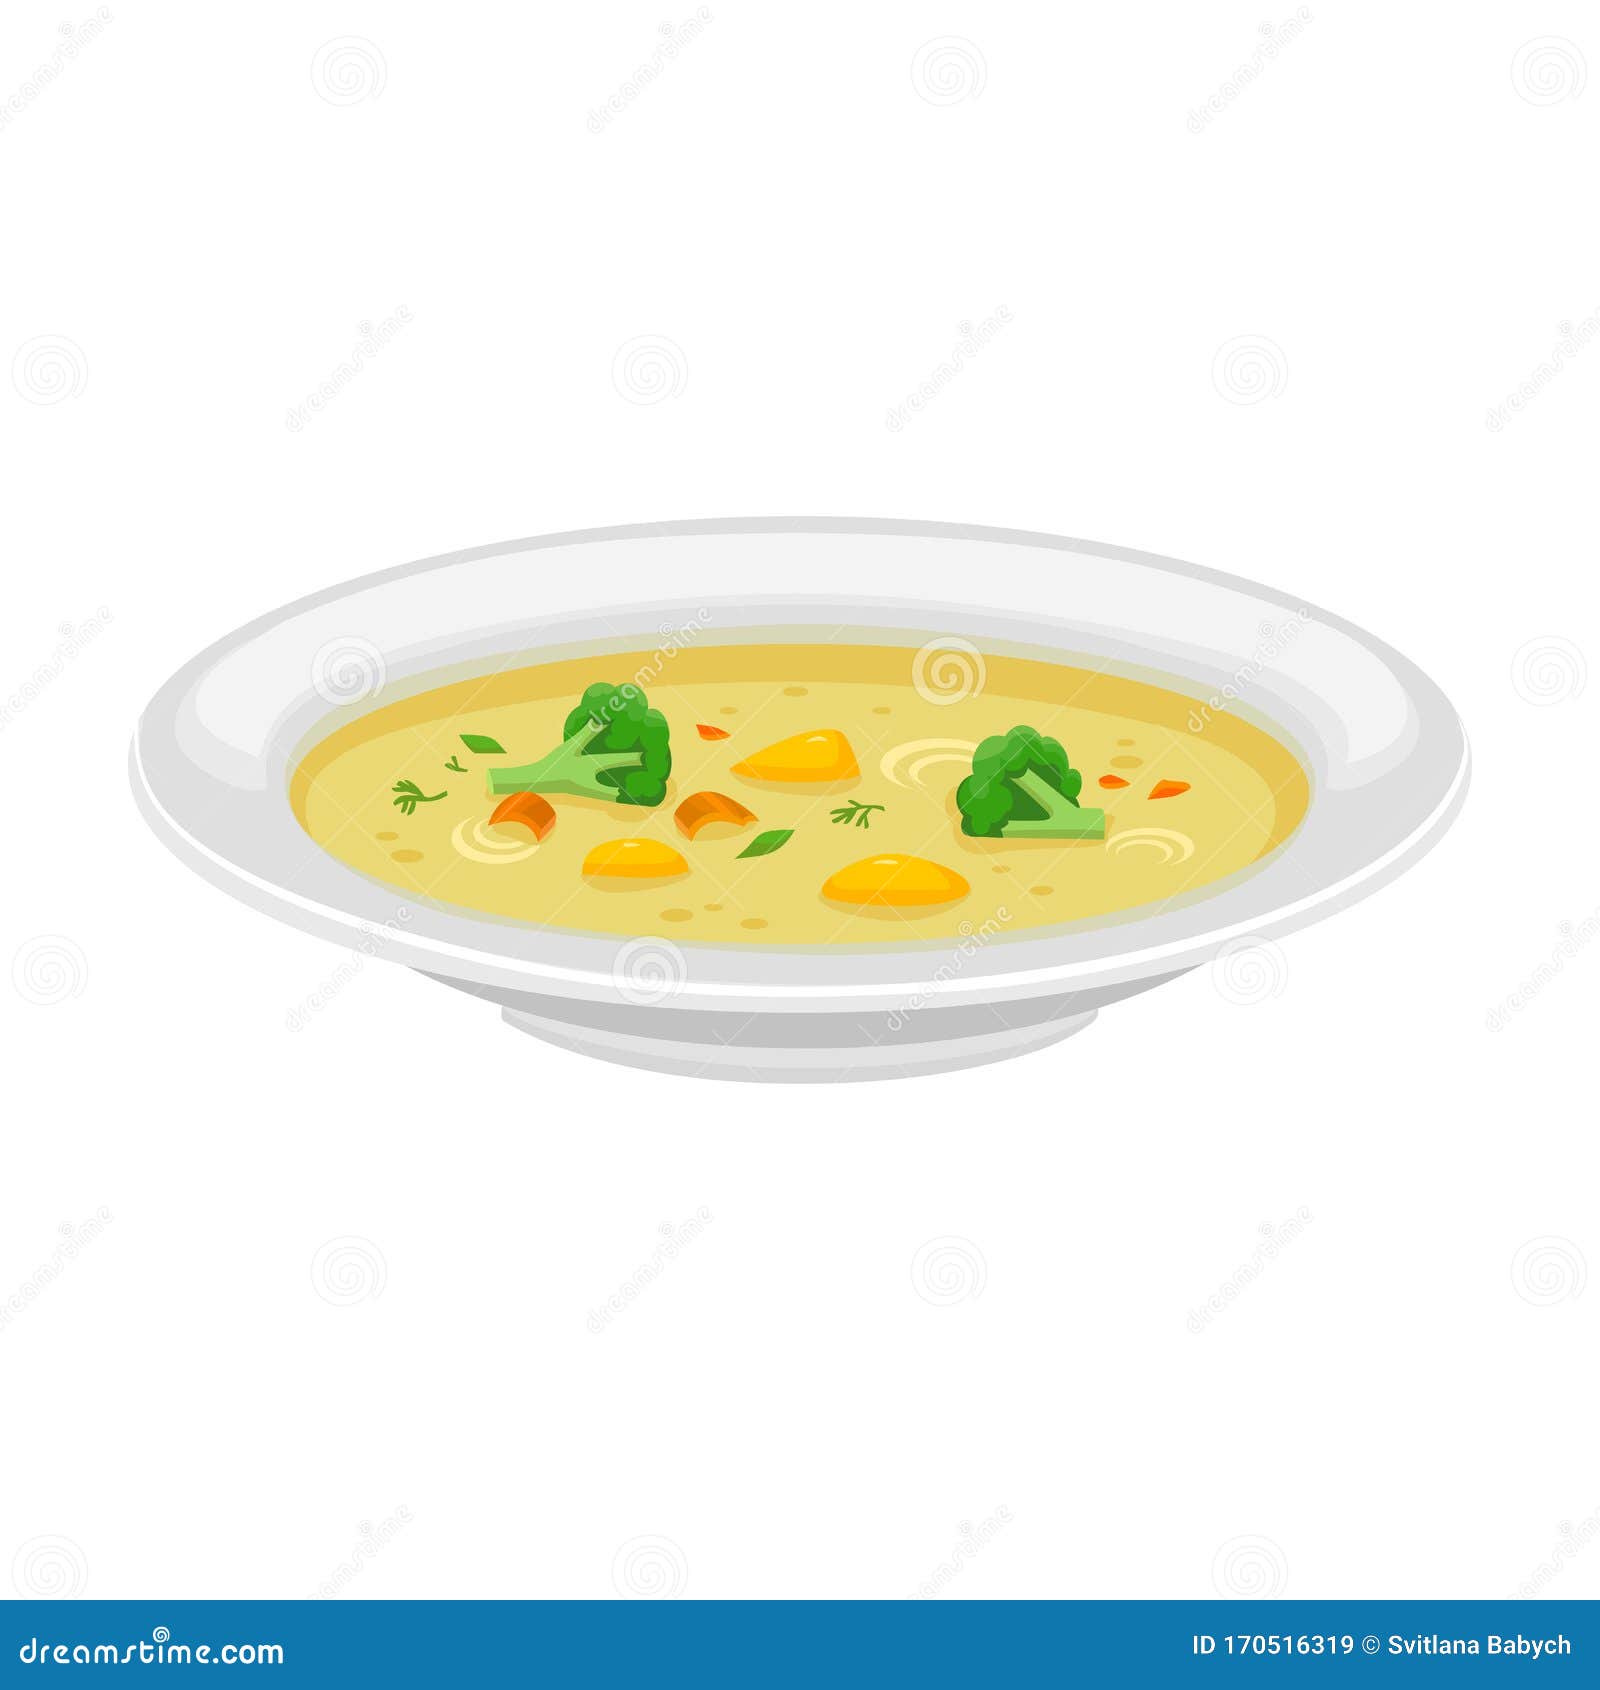 Plate of Soup Vector  Vector Icon Isolated on White Background  Plate of Soup. Stock Vector - Illustration of bouillon, food: 170516319